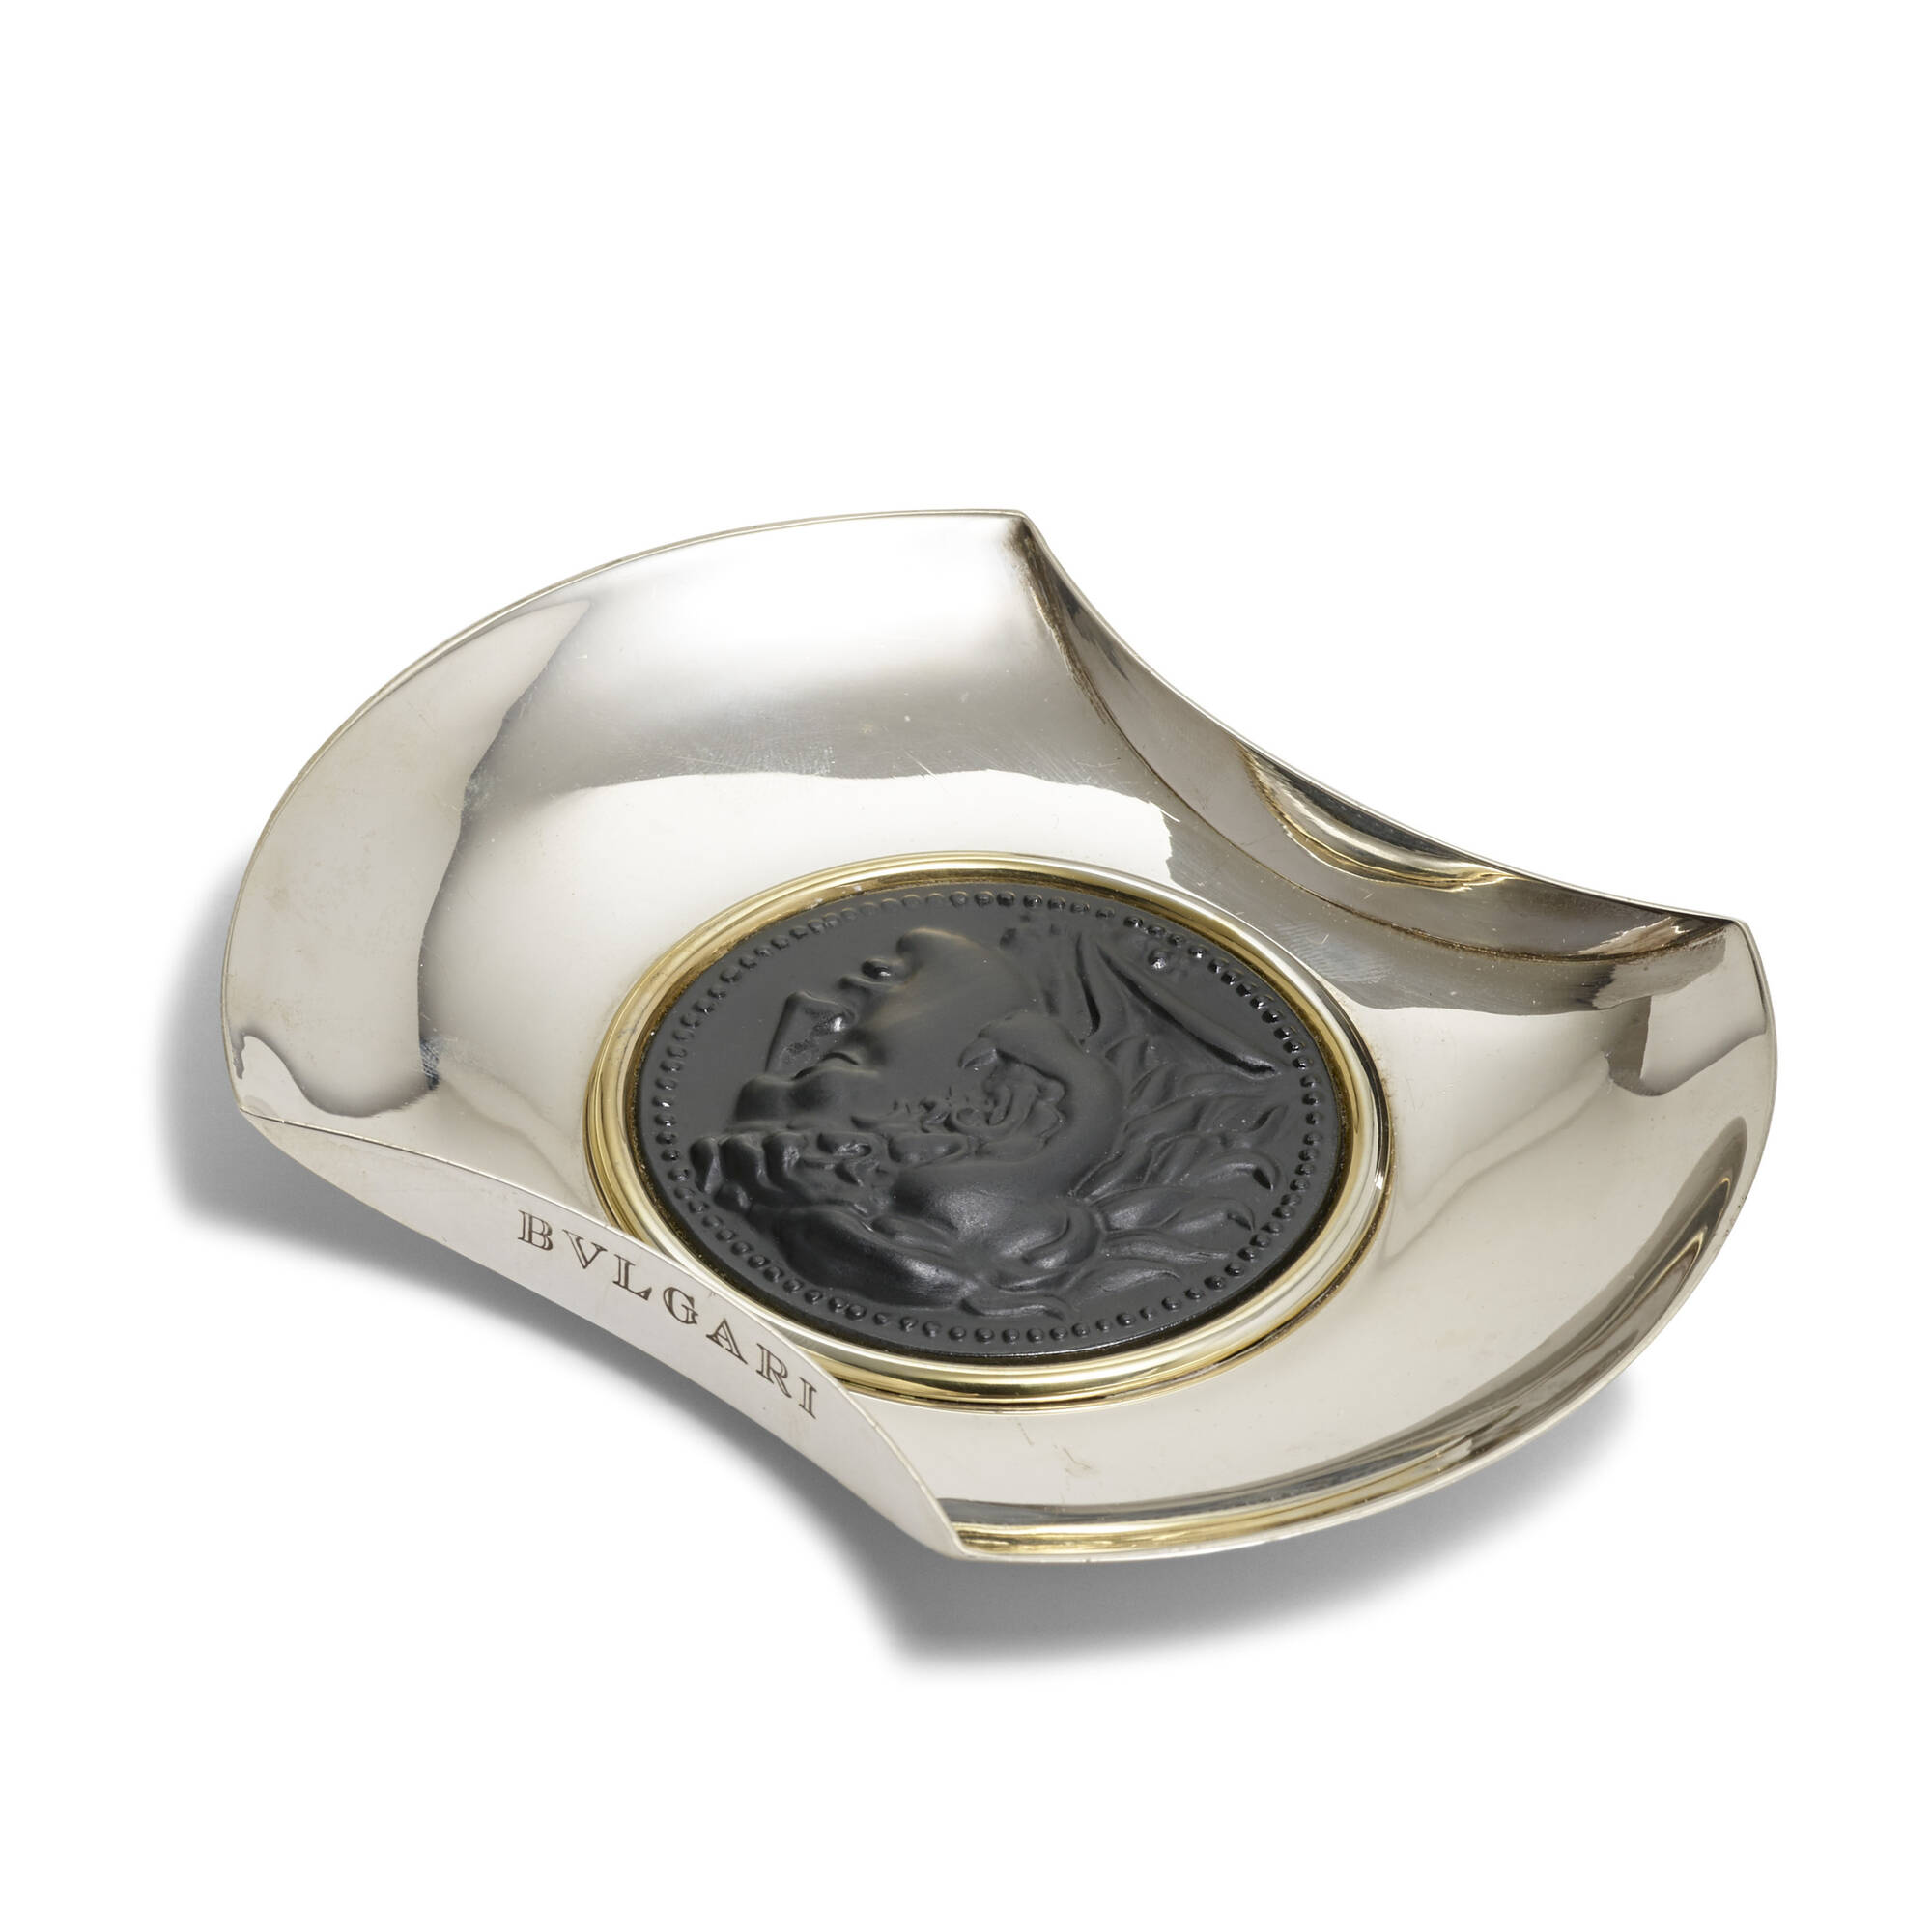 207: BULGARI, Roman Coin vide poche < A Century of Luxury & Design, 22 July  2020 < Auctions | Wright: Auctions of Art and Design